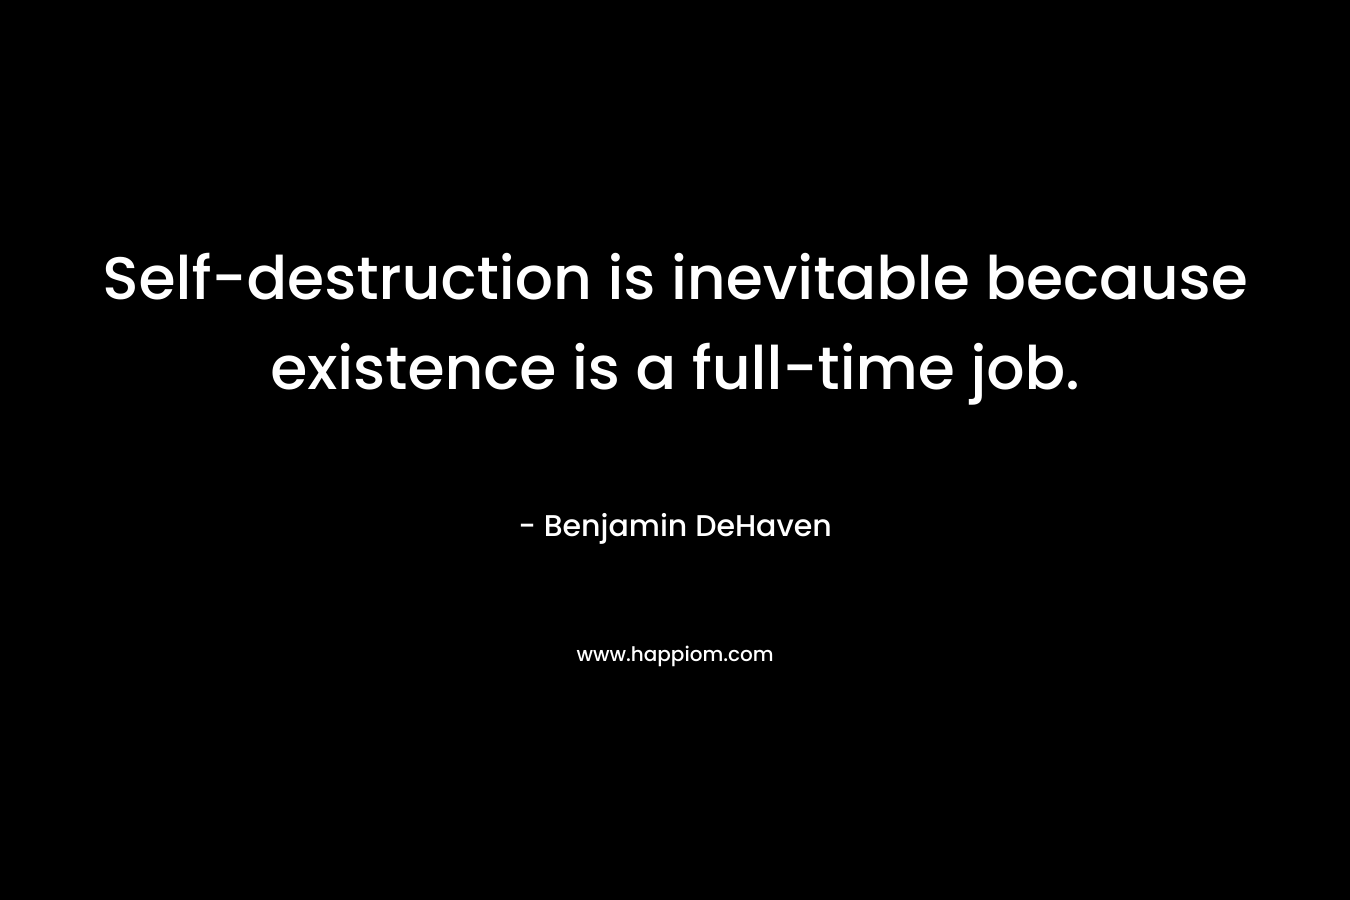 Self-destruction is inevitable because existence is a full-time job. – Benjamin DeHaven